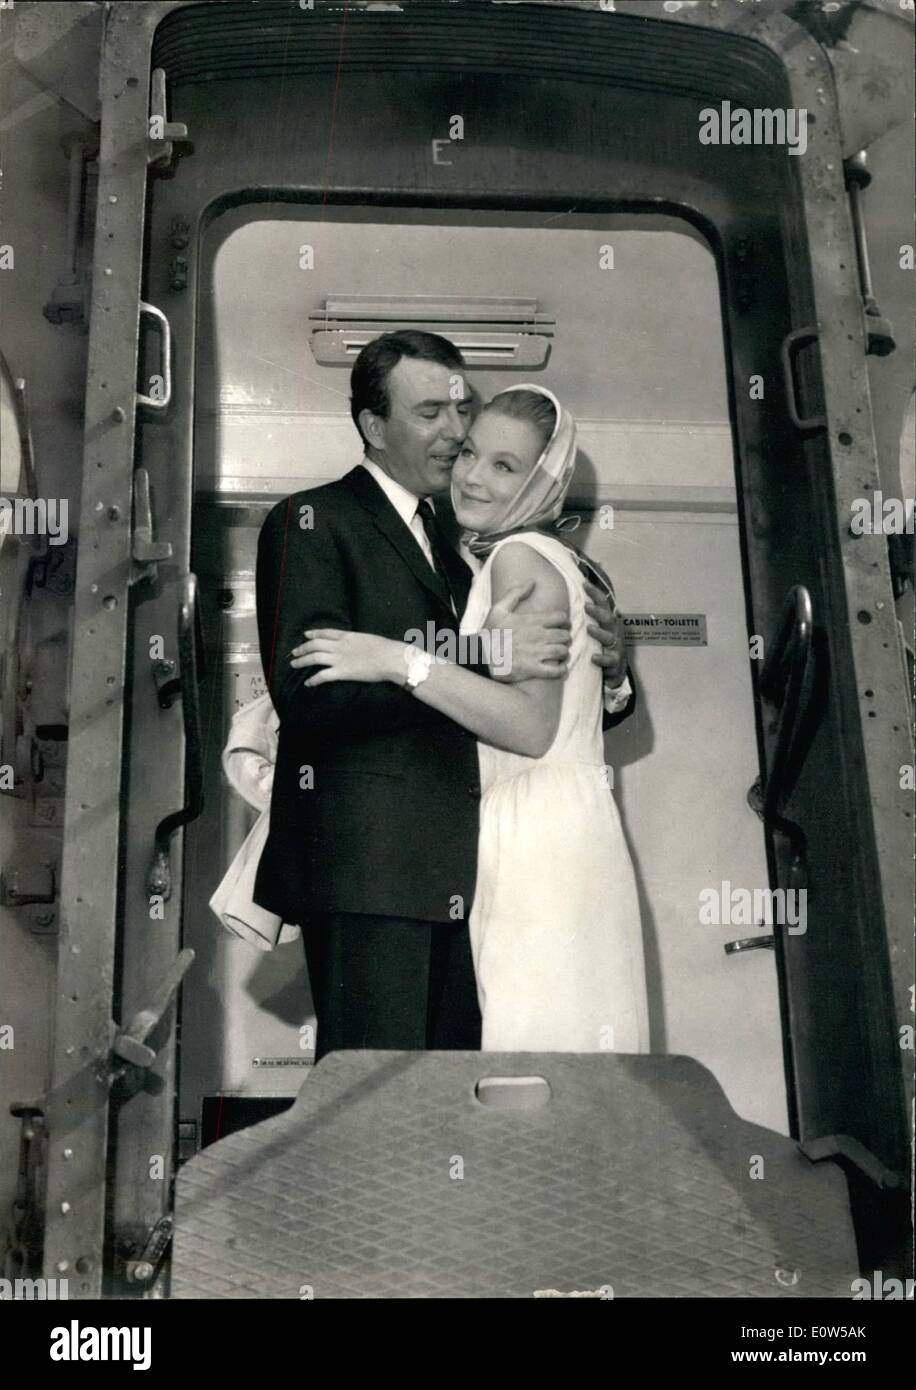 Sep. 09, 1961 - Marina Vlady Stars In New Film: Marine Vlady, the young French screen actress, is playing the leading part in the film ''Malefice'' now an the making. Photo Shows Marina Vlady and Jean-Pierre Marielle in a scene of the film which place in a train at the Gare De Lyon. Stock Photo